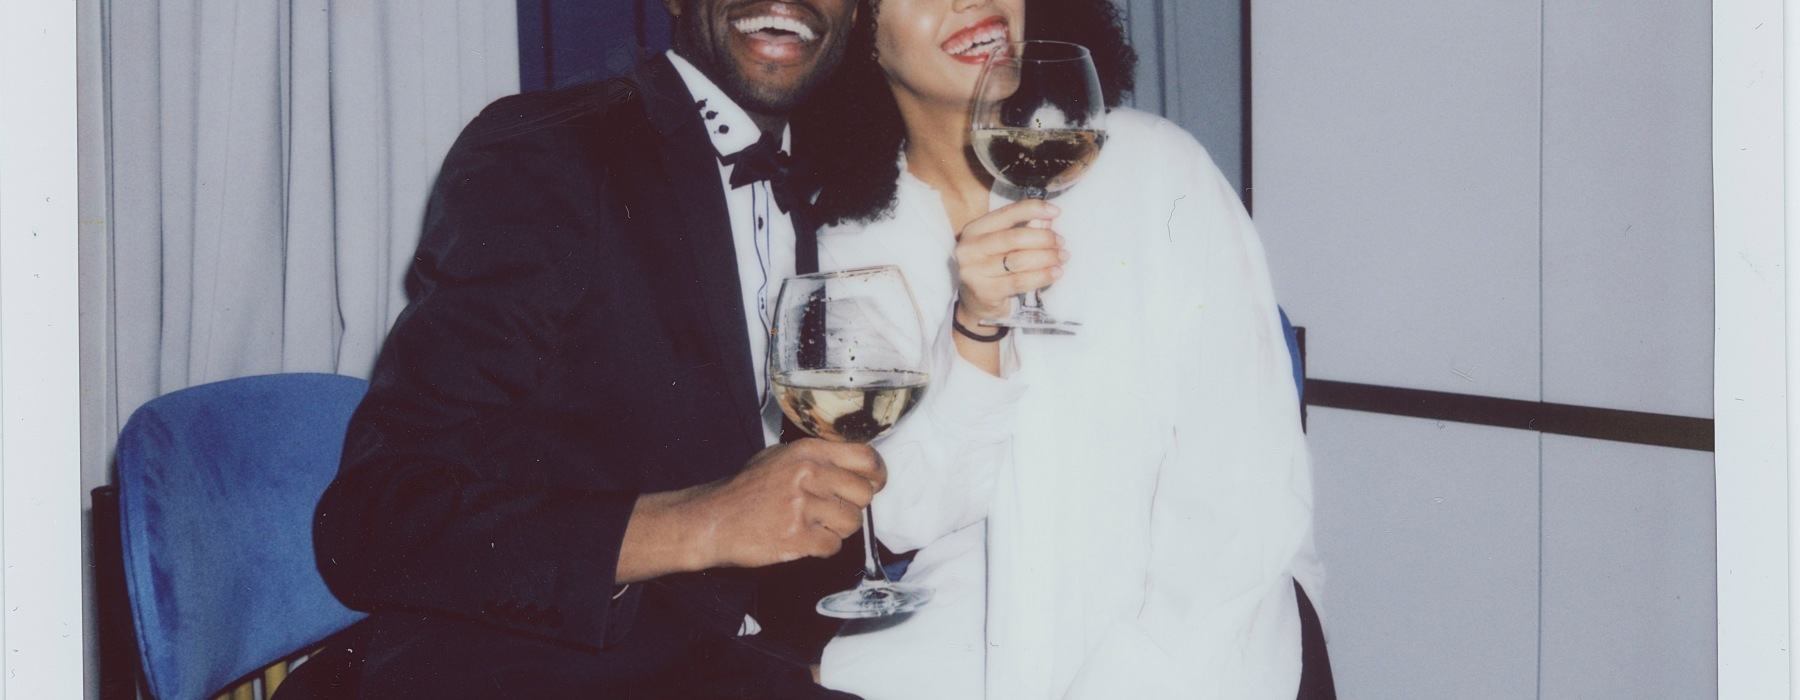 Couple smiling holding wine glasses on Valentine's Day